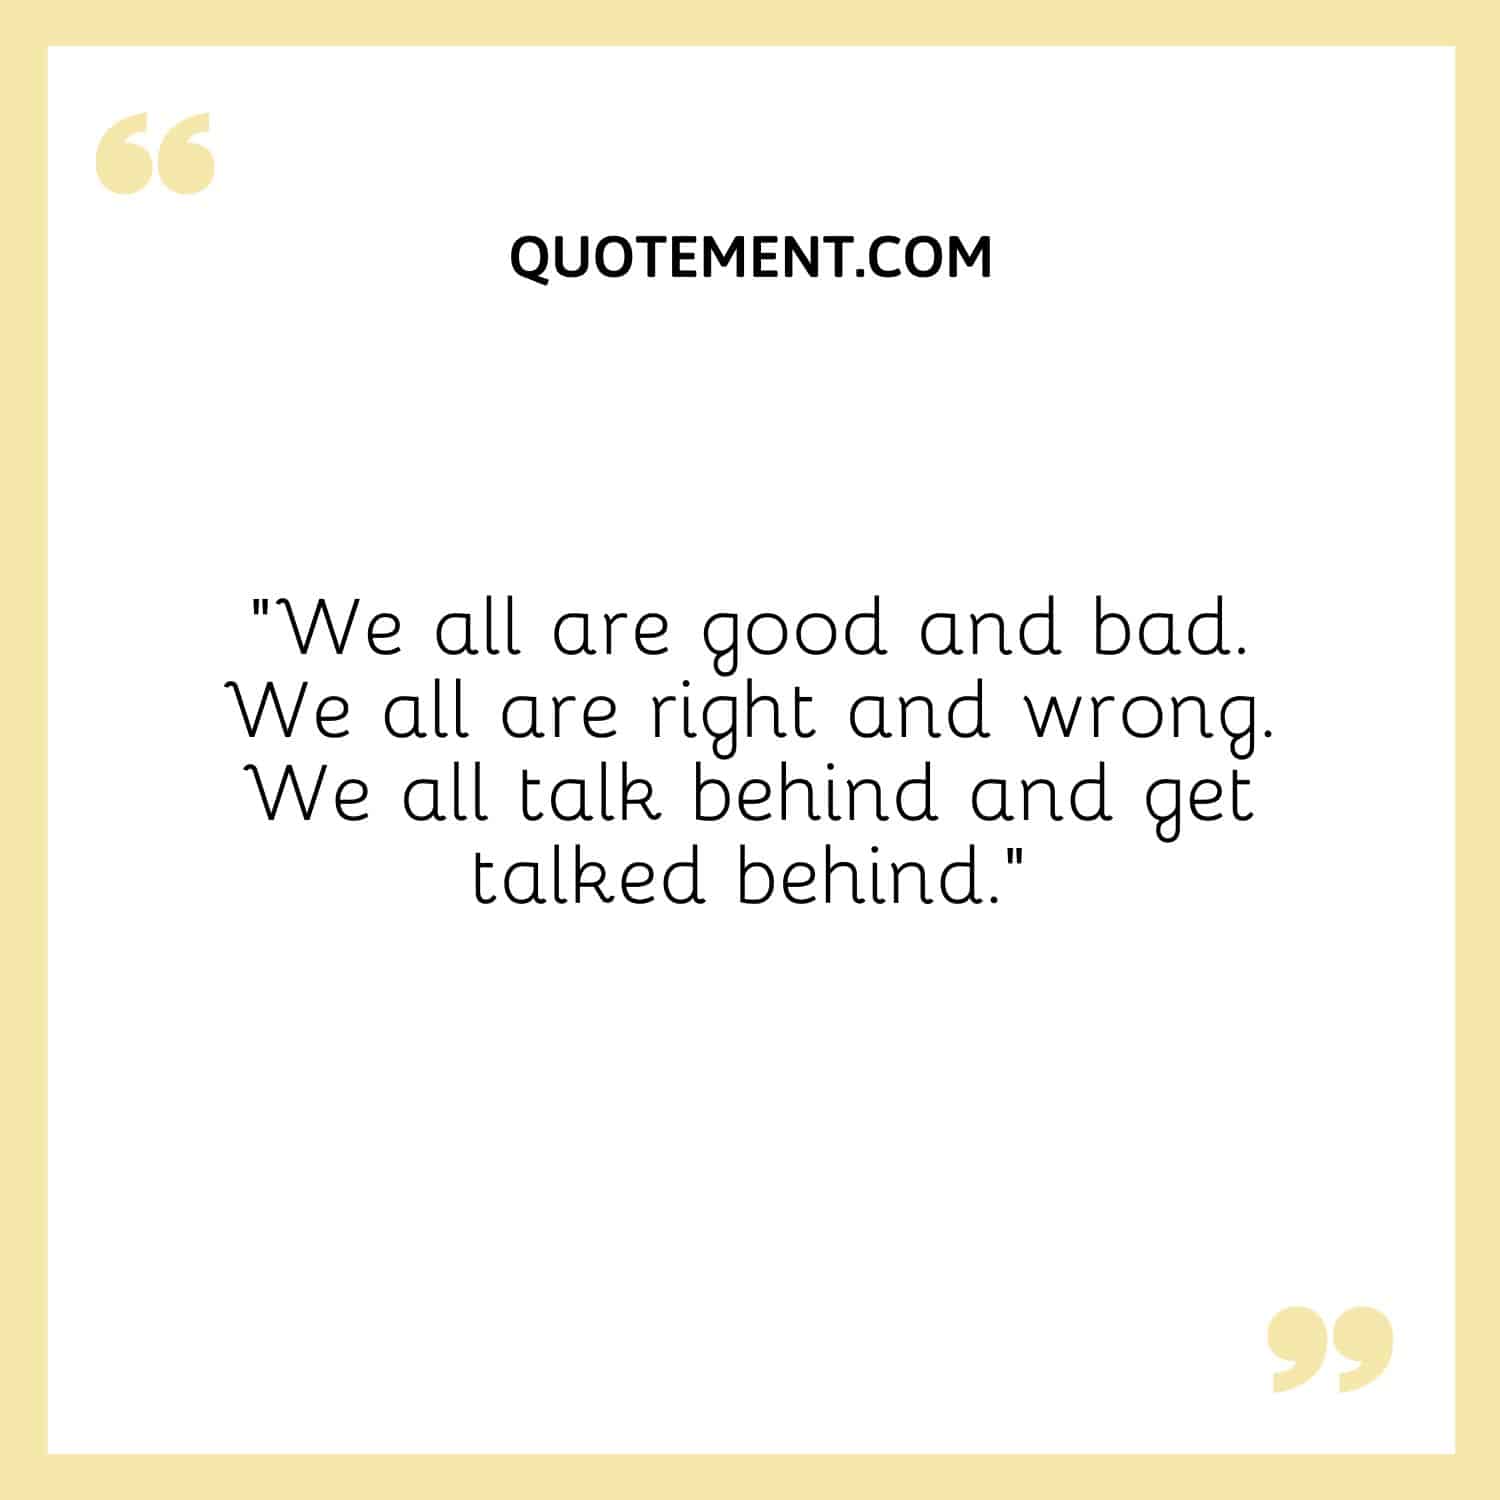 “We all are good and bad. We all are right and wrong. We all talk behind and get talked behind.”